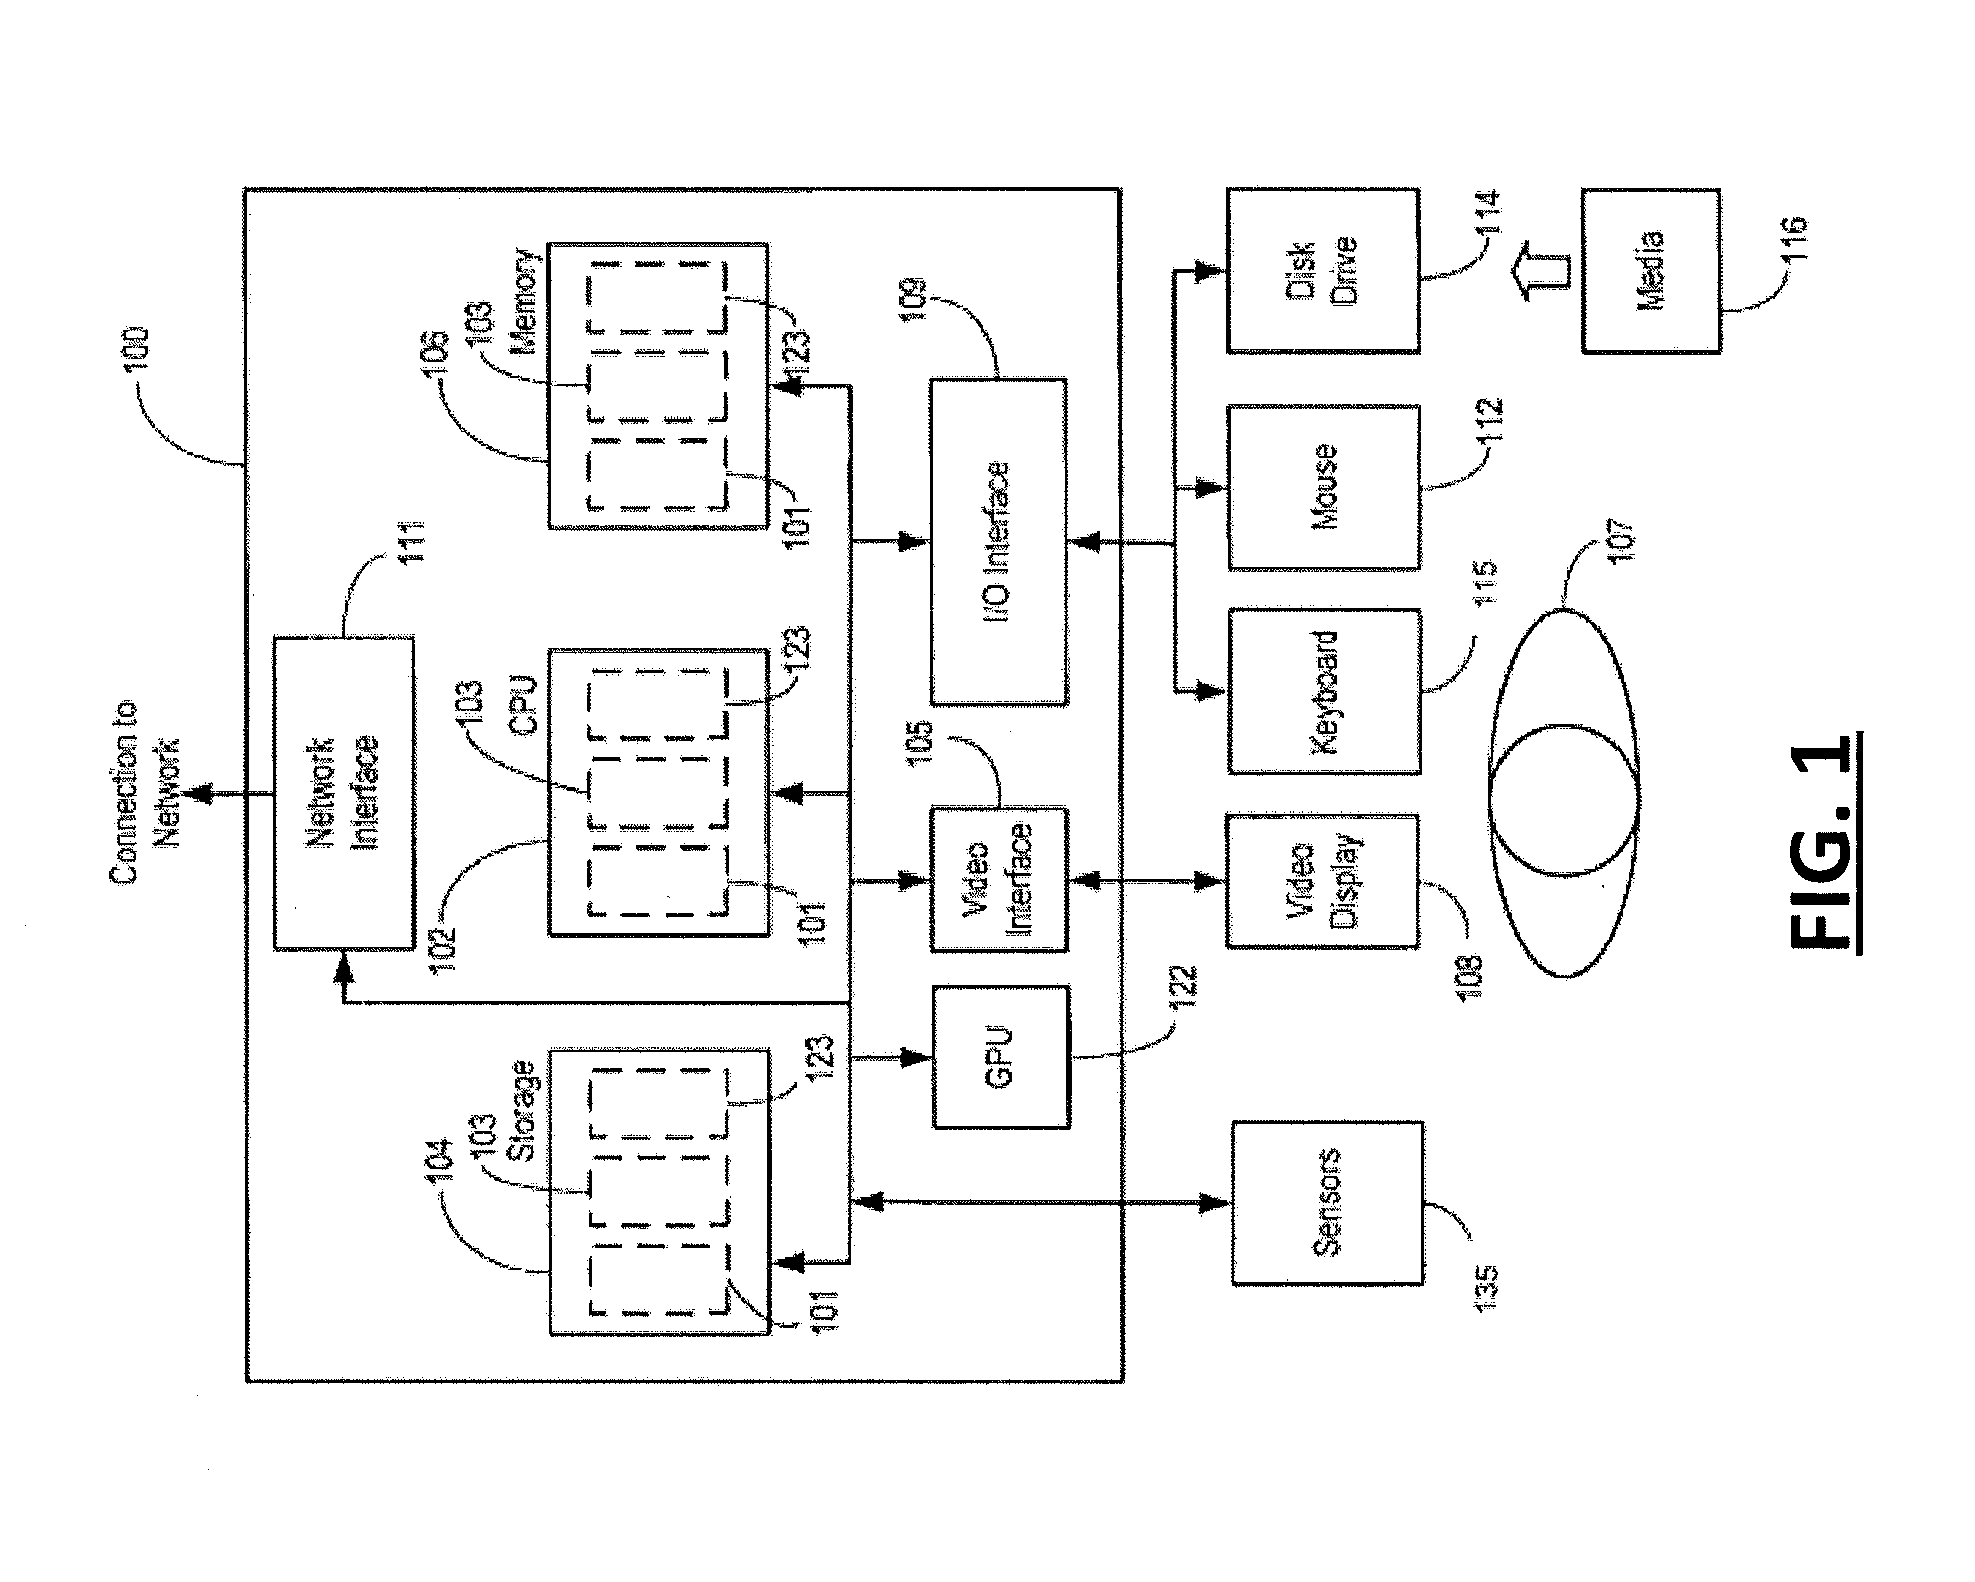 System and method for managing healthcare